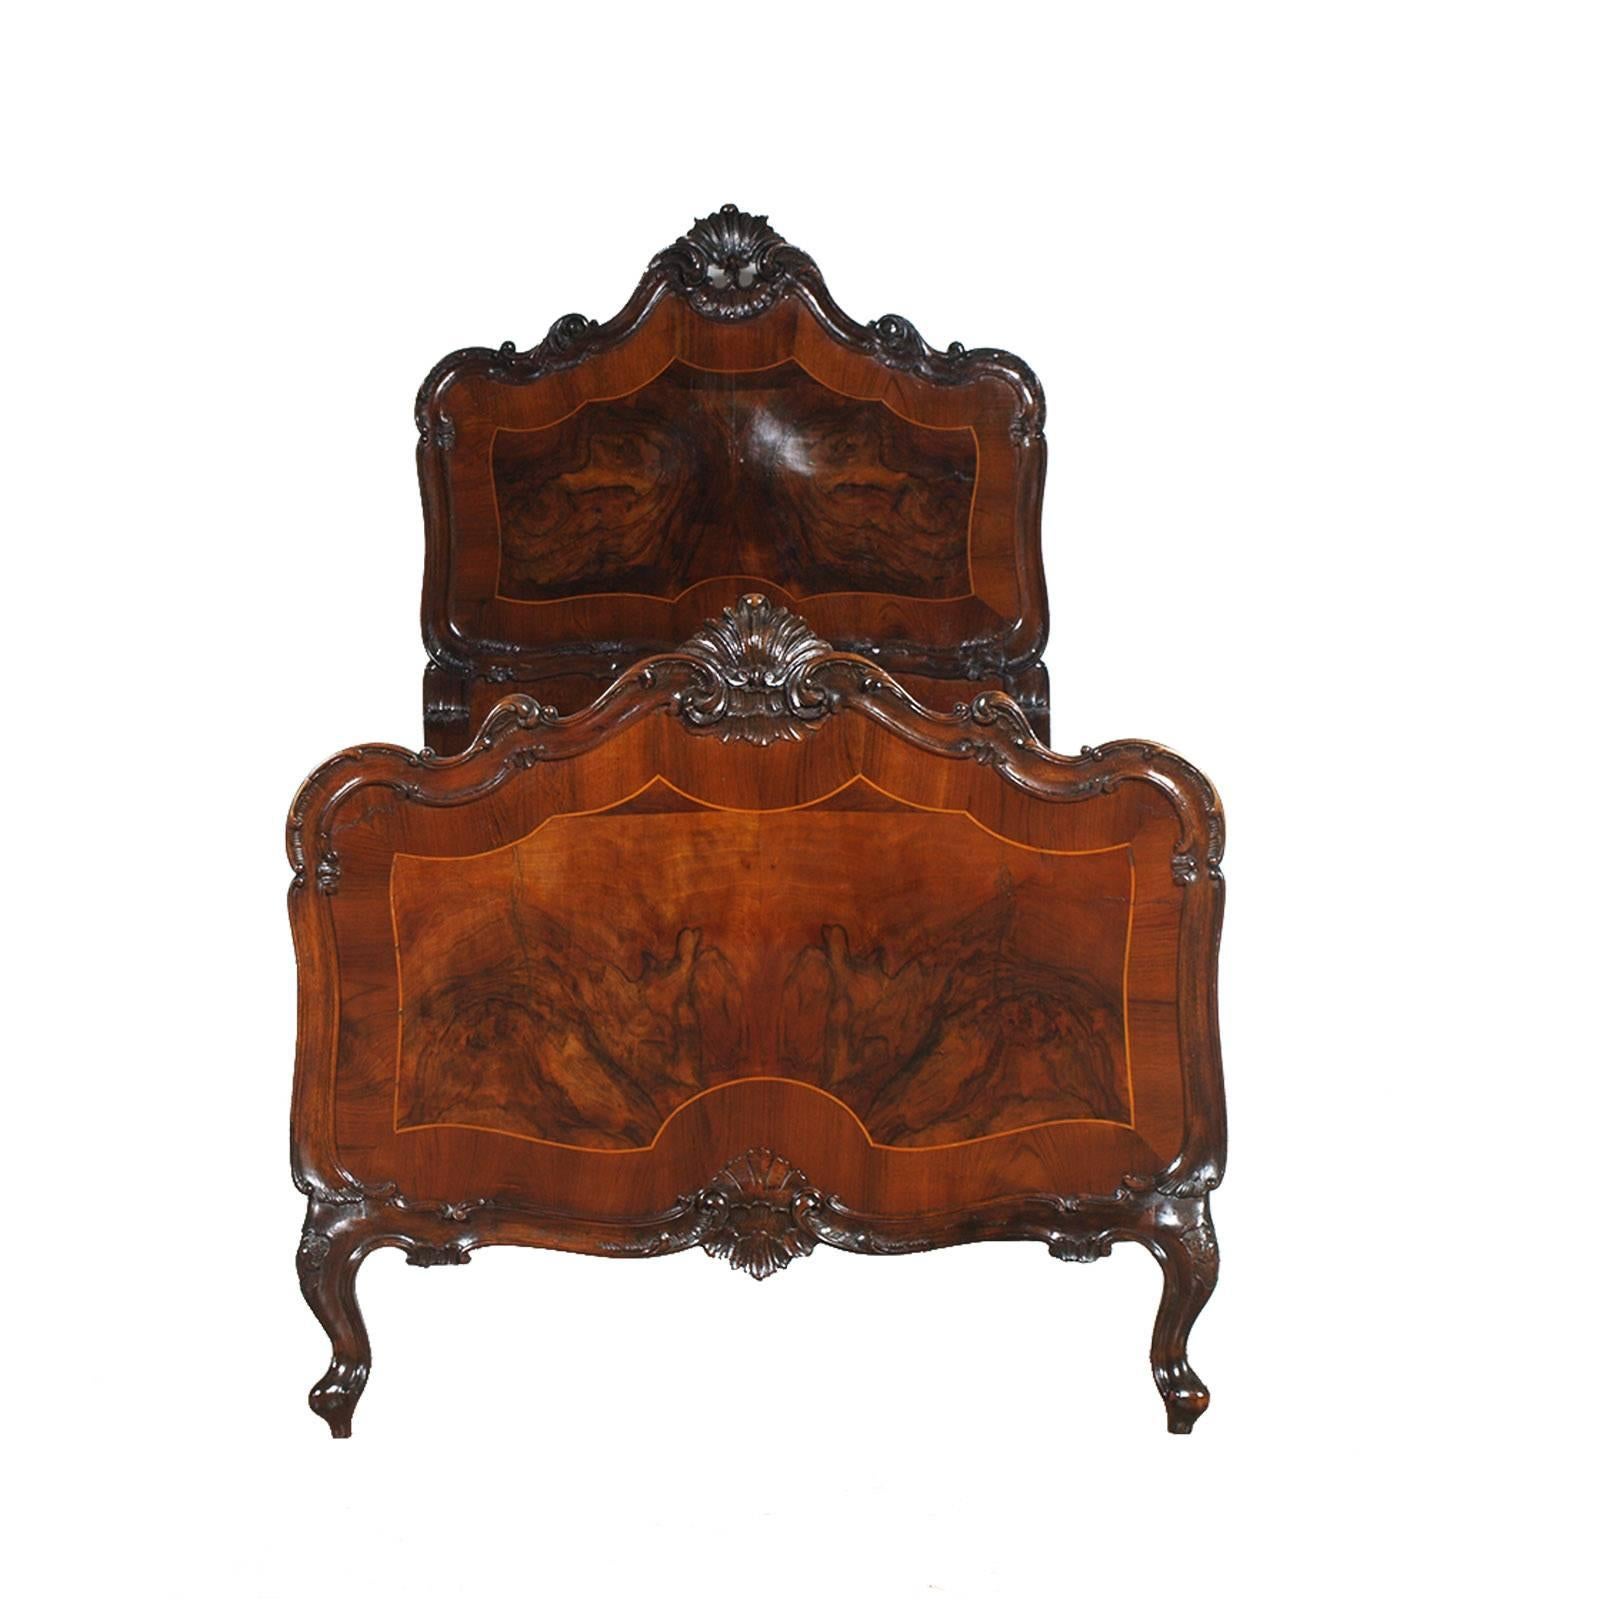 Baroque Revival 1920s Venetian Baroque Beds Hand-Carved Walnut, burl , by Testolini & Salviati For Sale